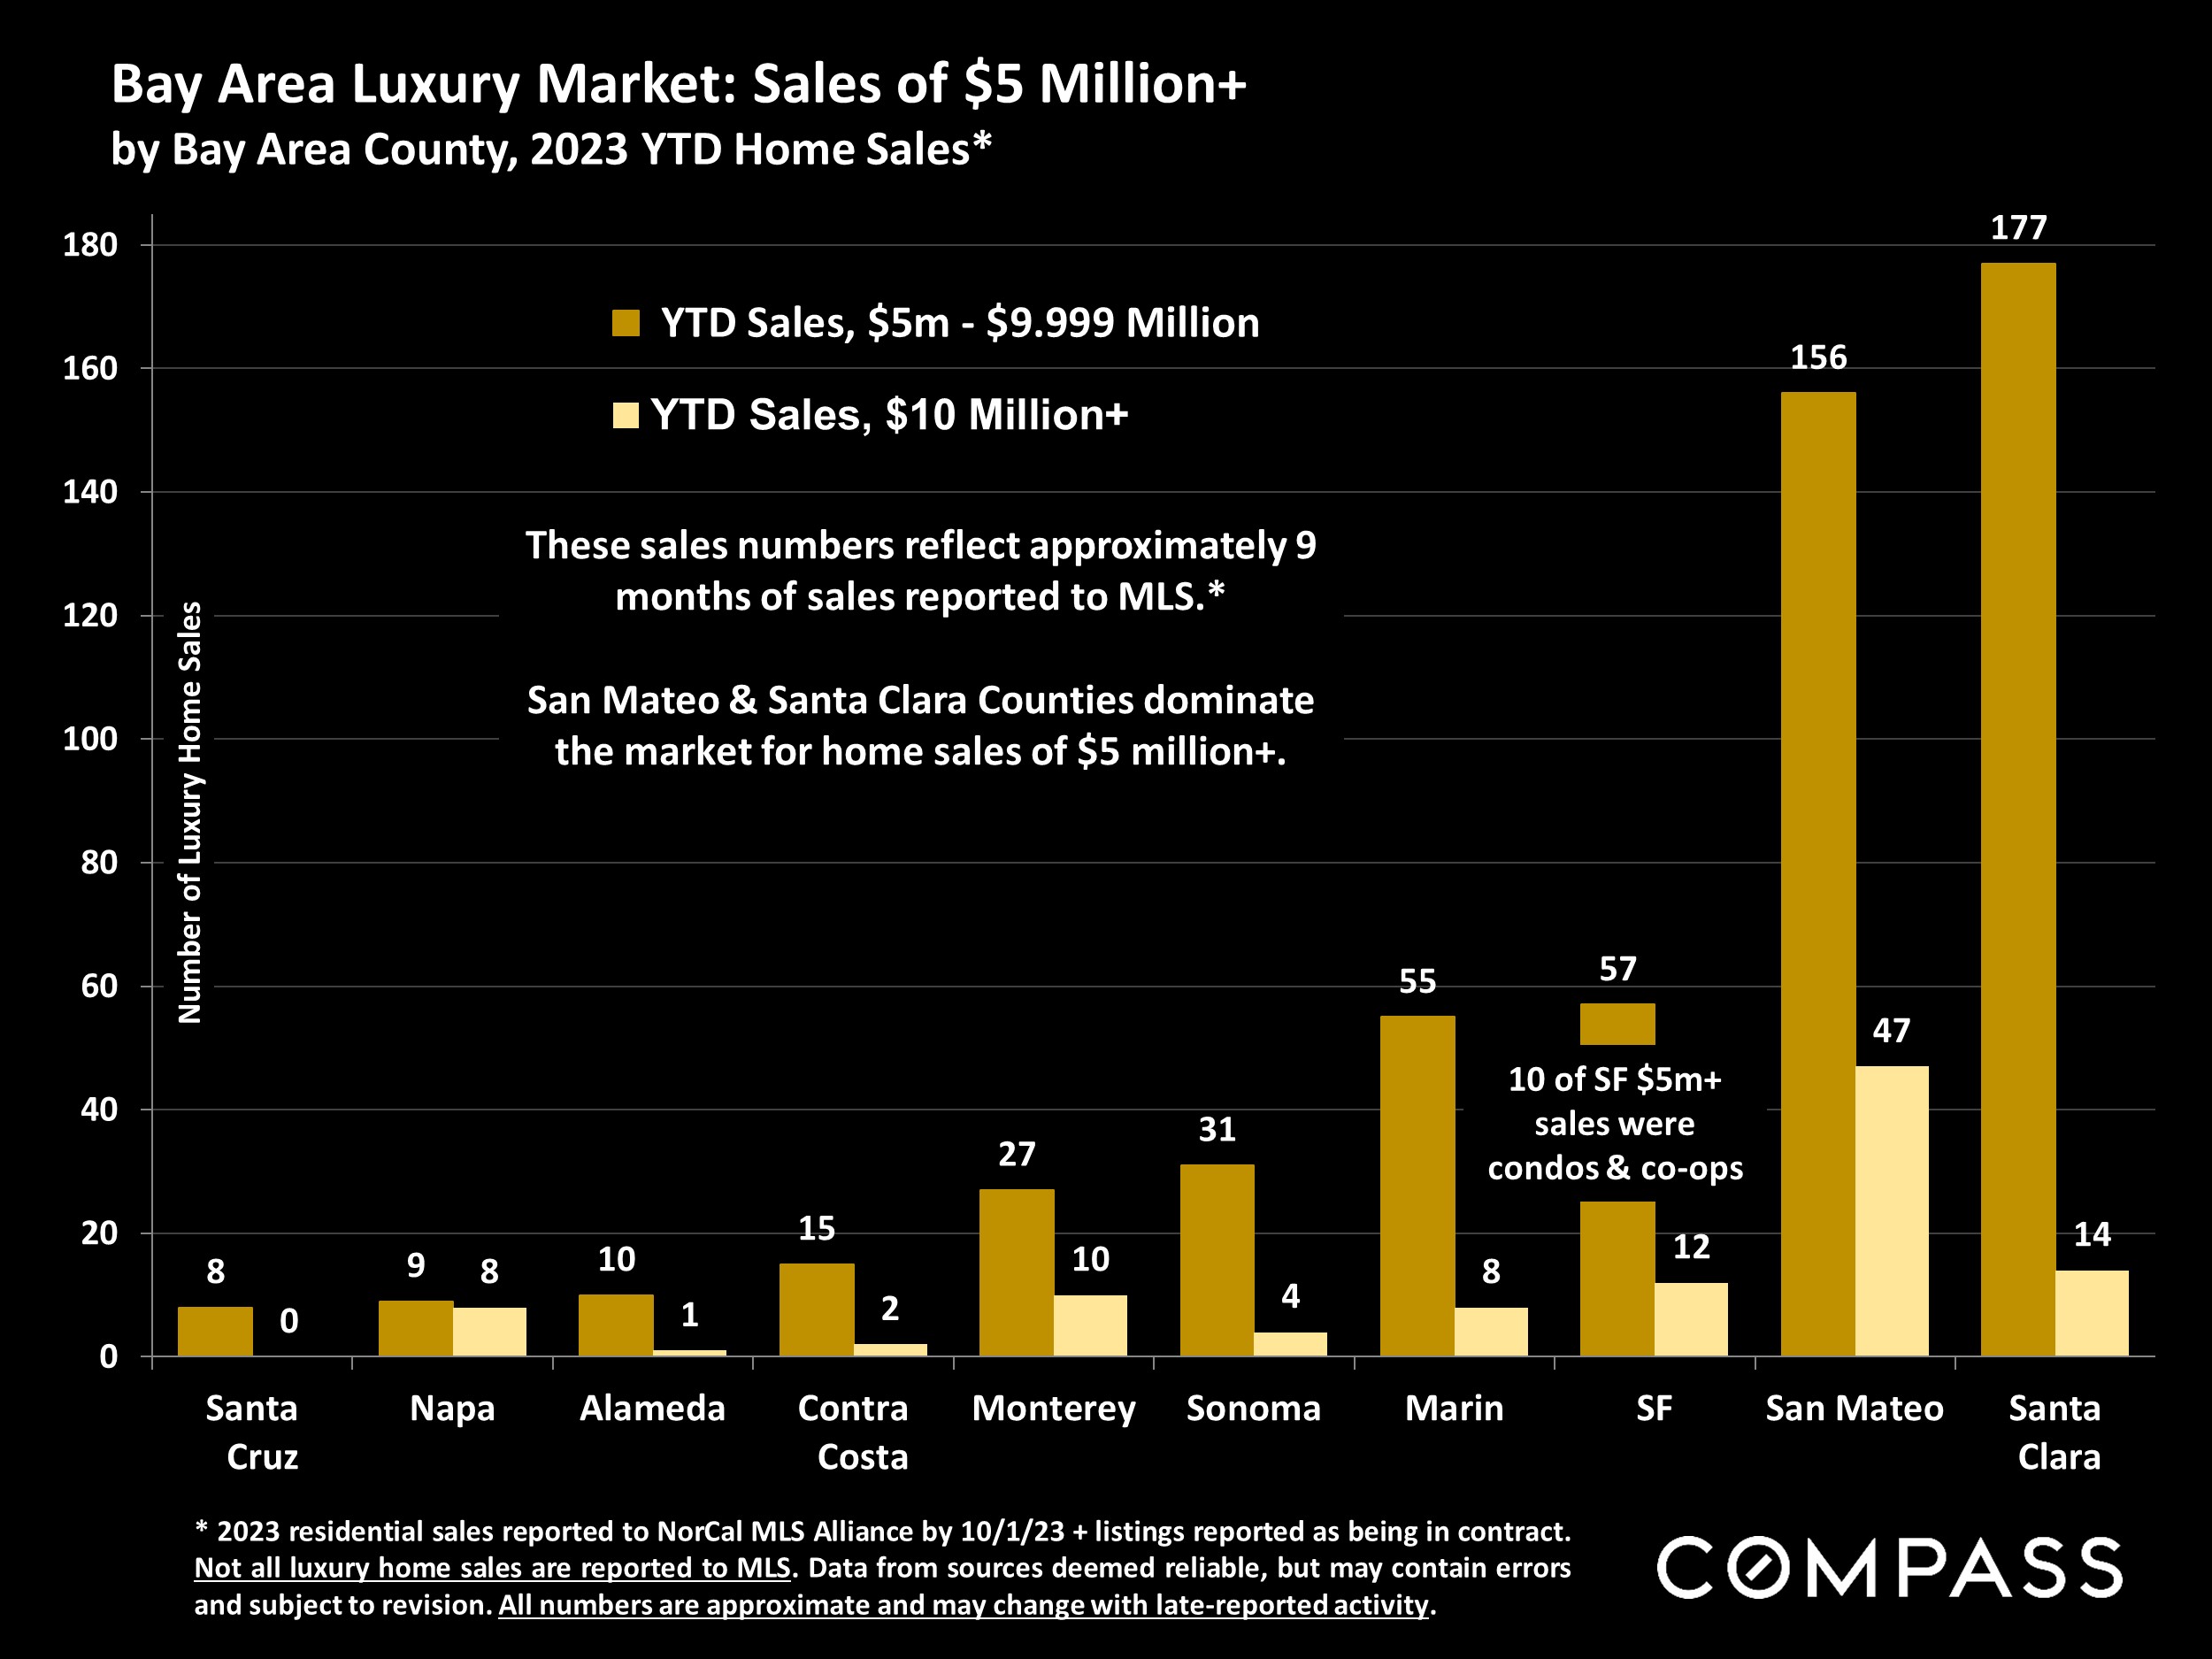 Bay Area Luxury Market: Sales of $5 Million+ by Bay Area County, 2023 YTD Home Sales*